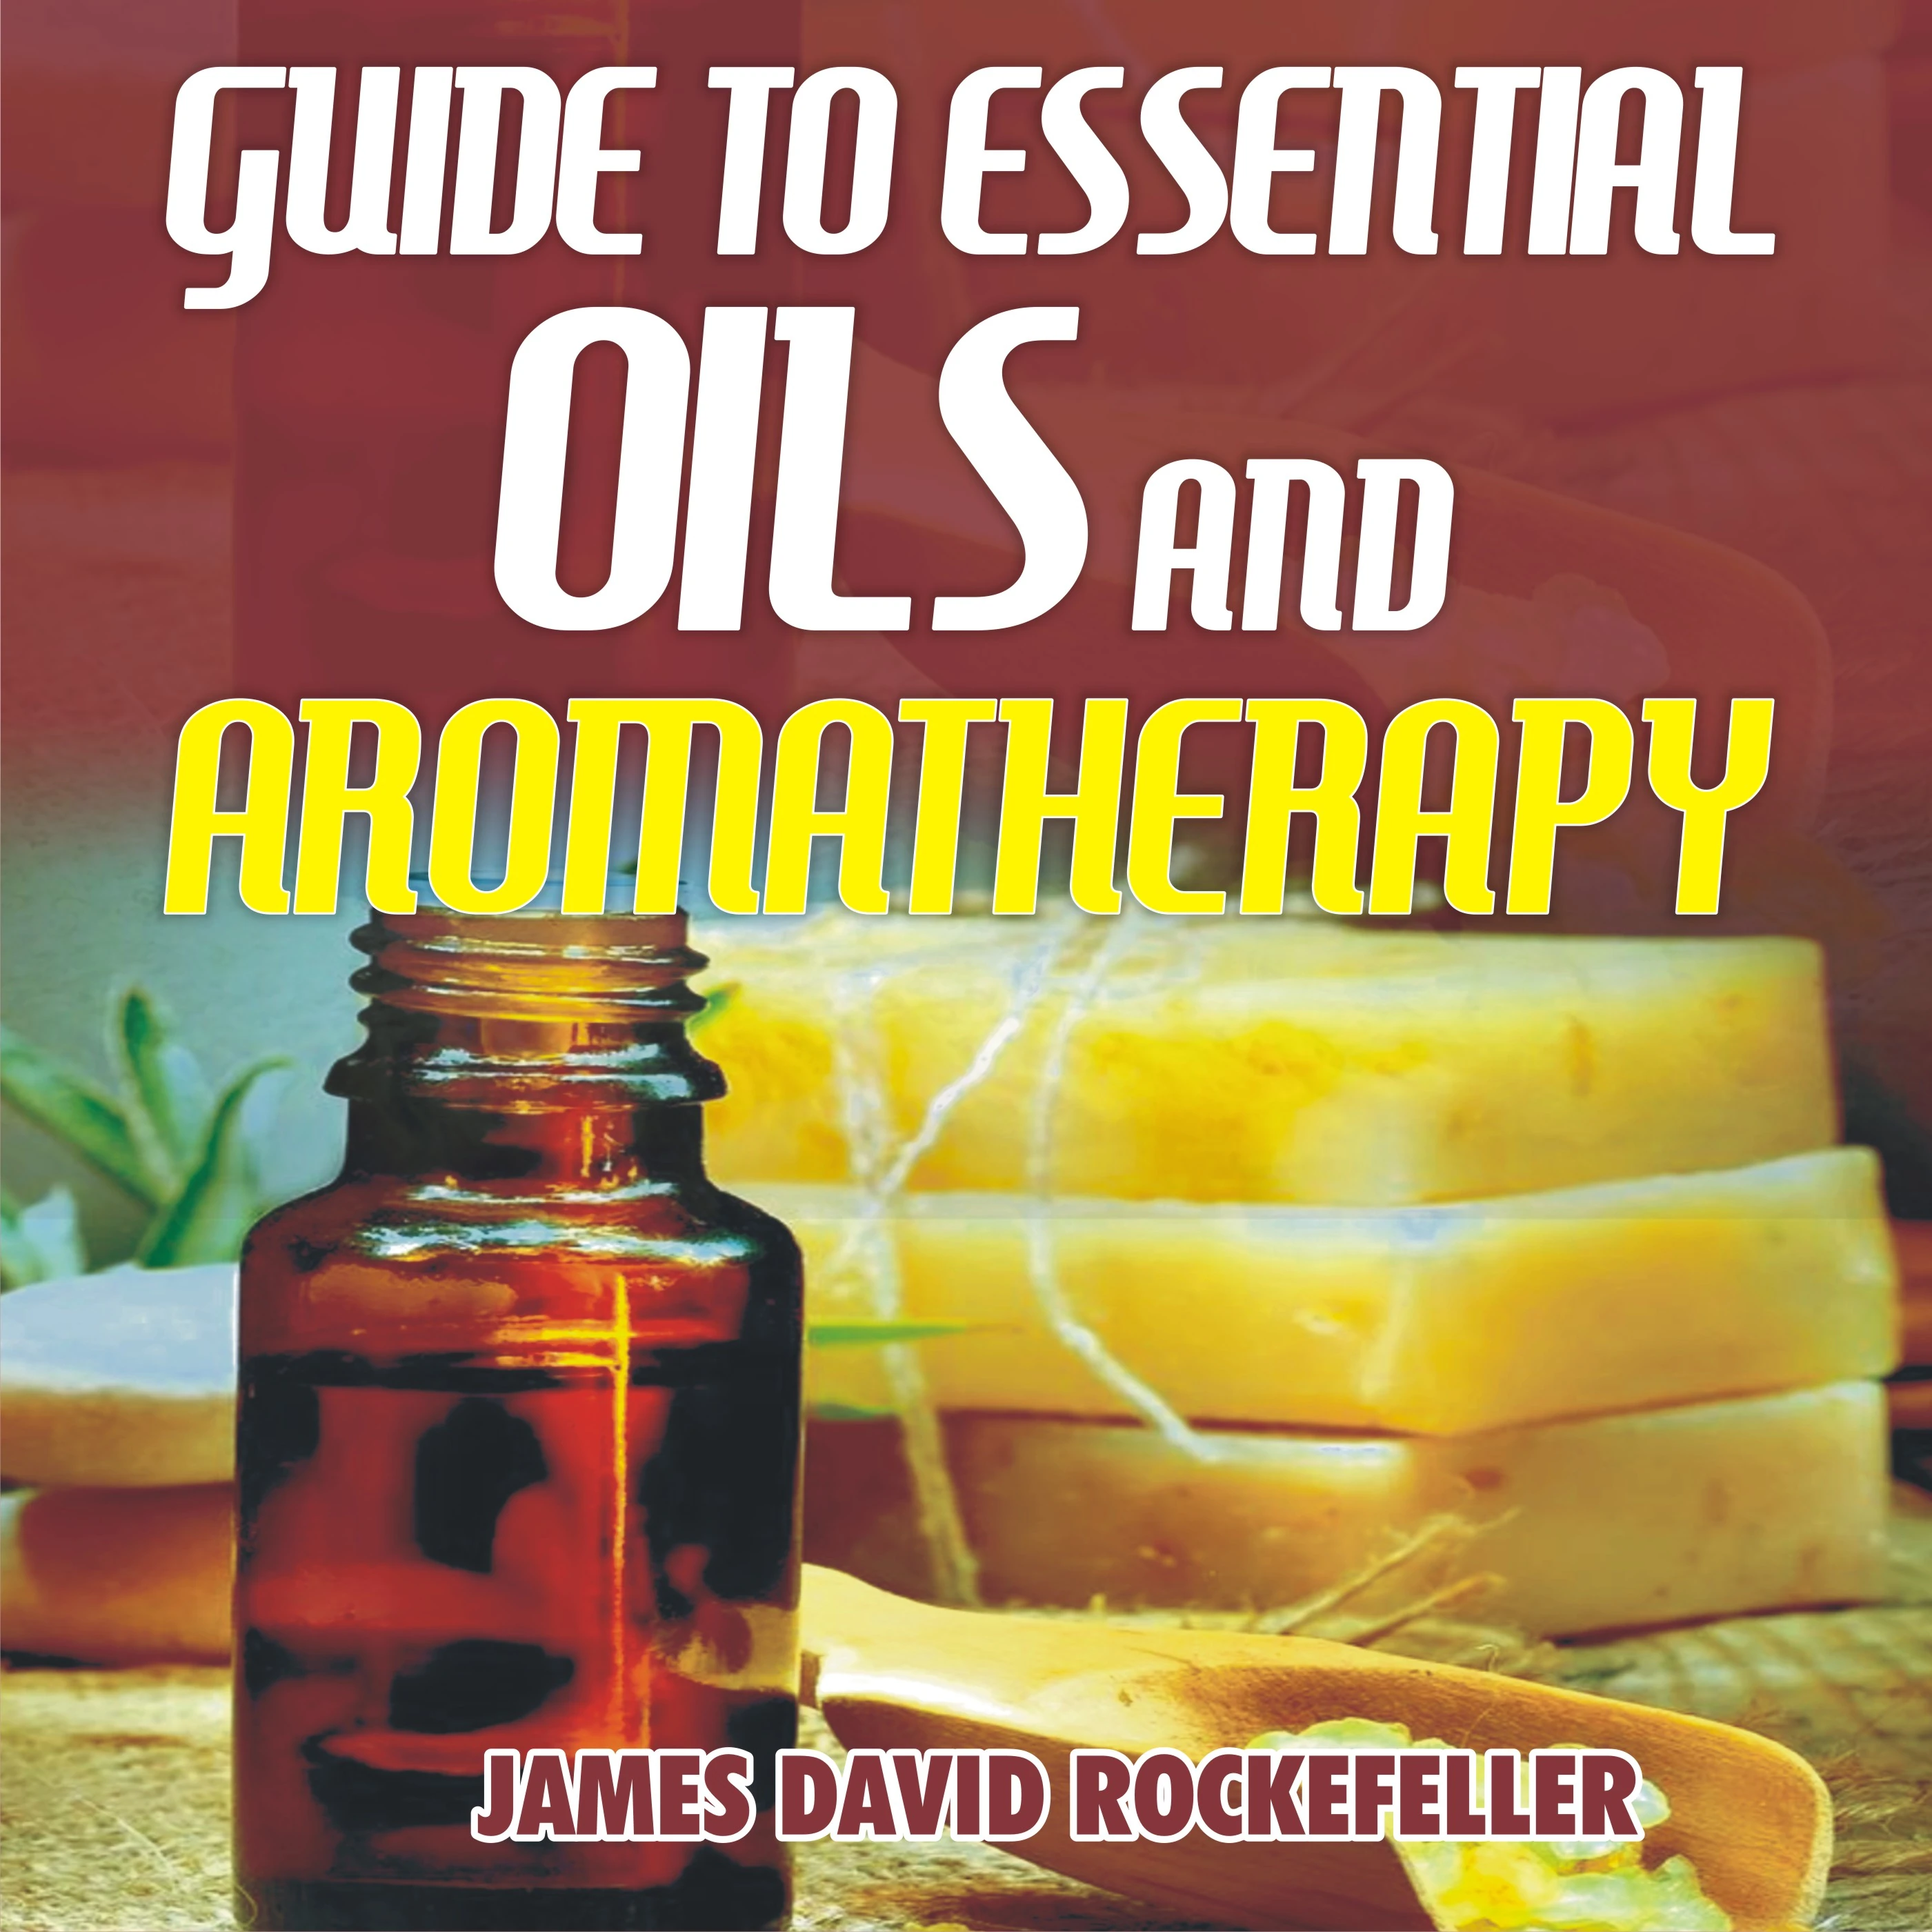 Guide to Essential Oils and Aromatherapy Audiobook by James David Rockefeller